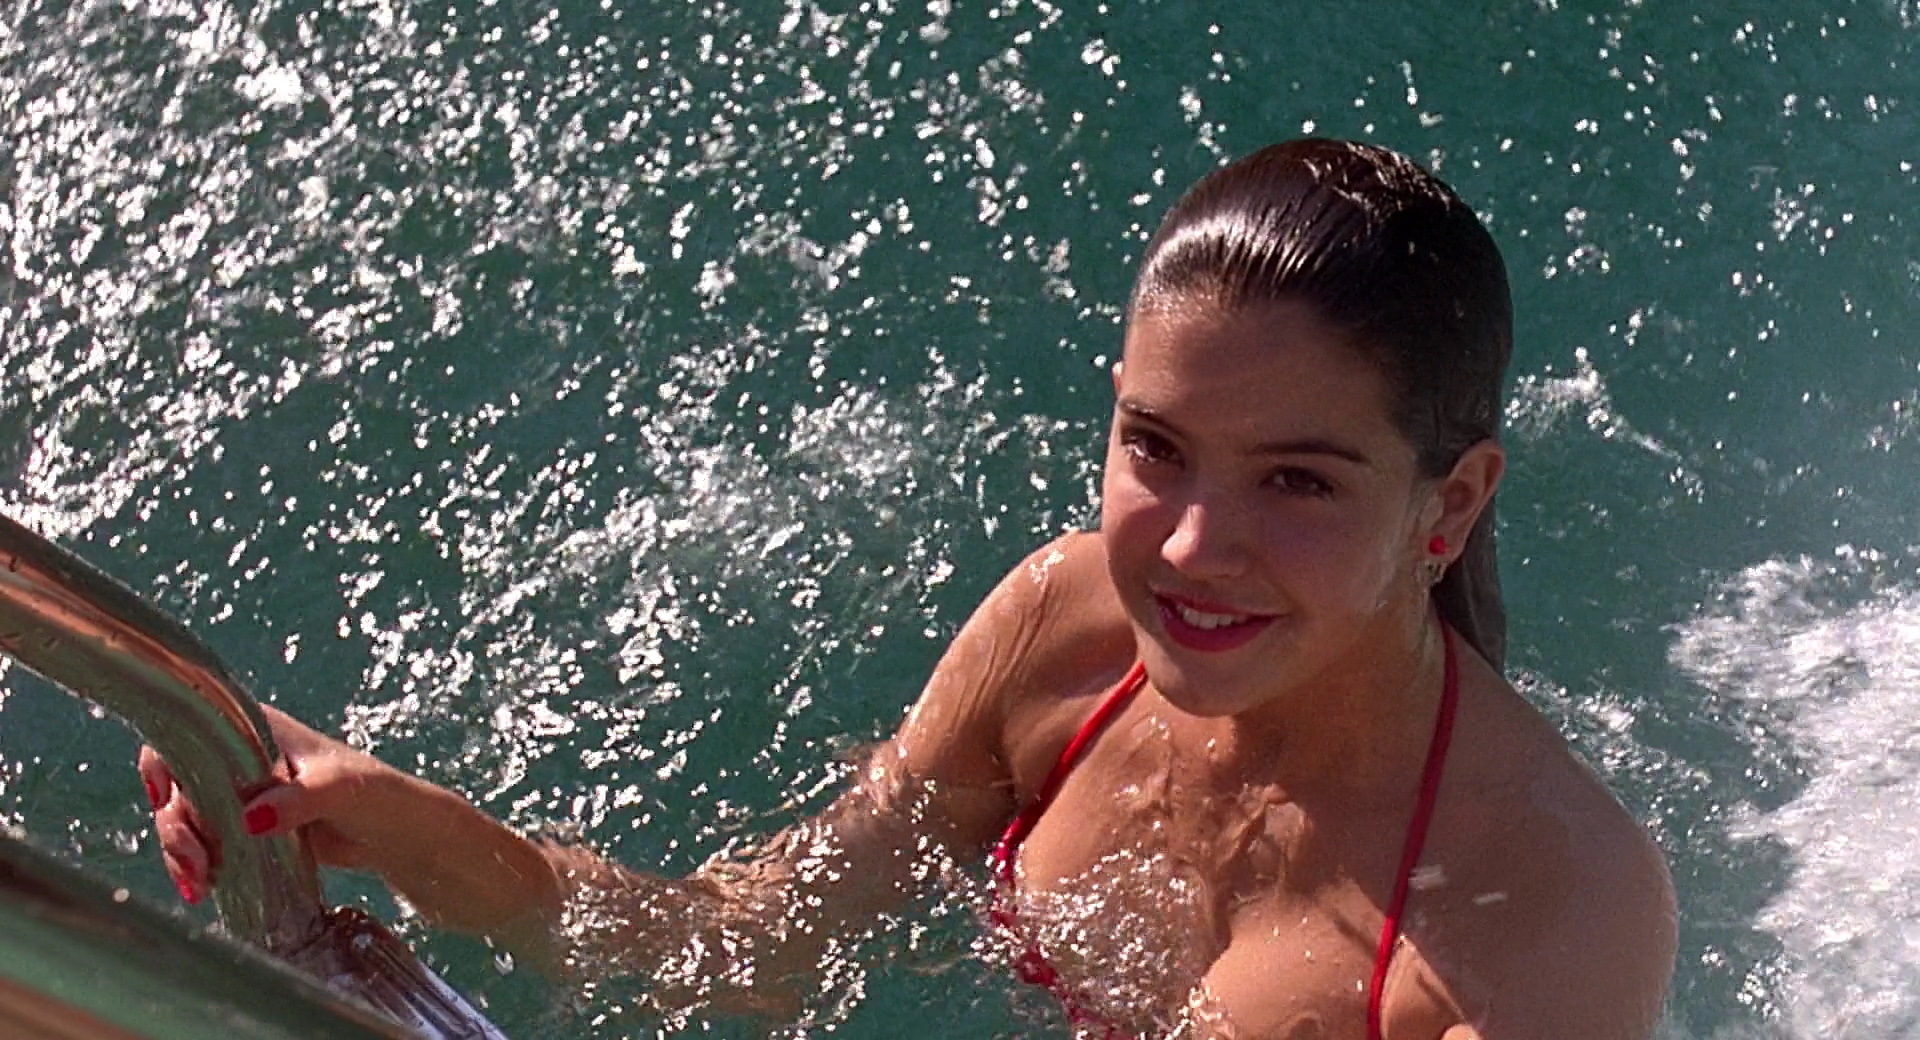 Fast times at ridgemont high nudes